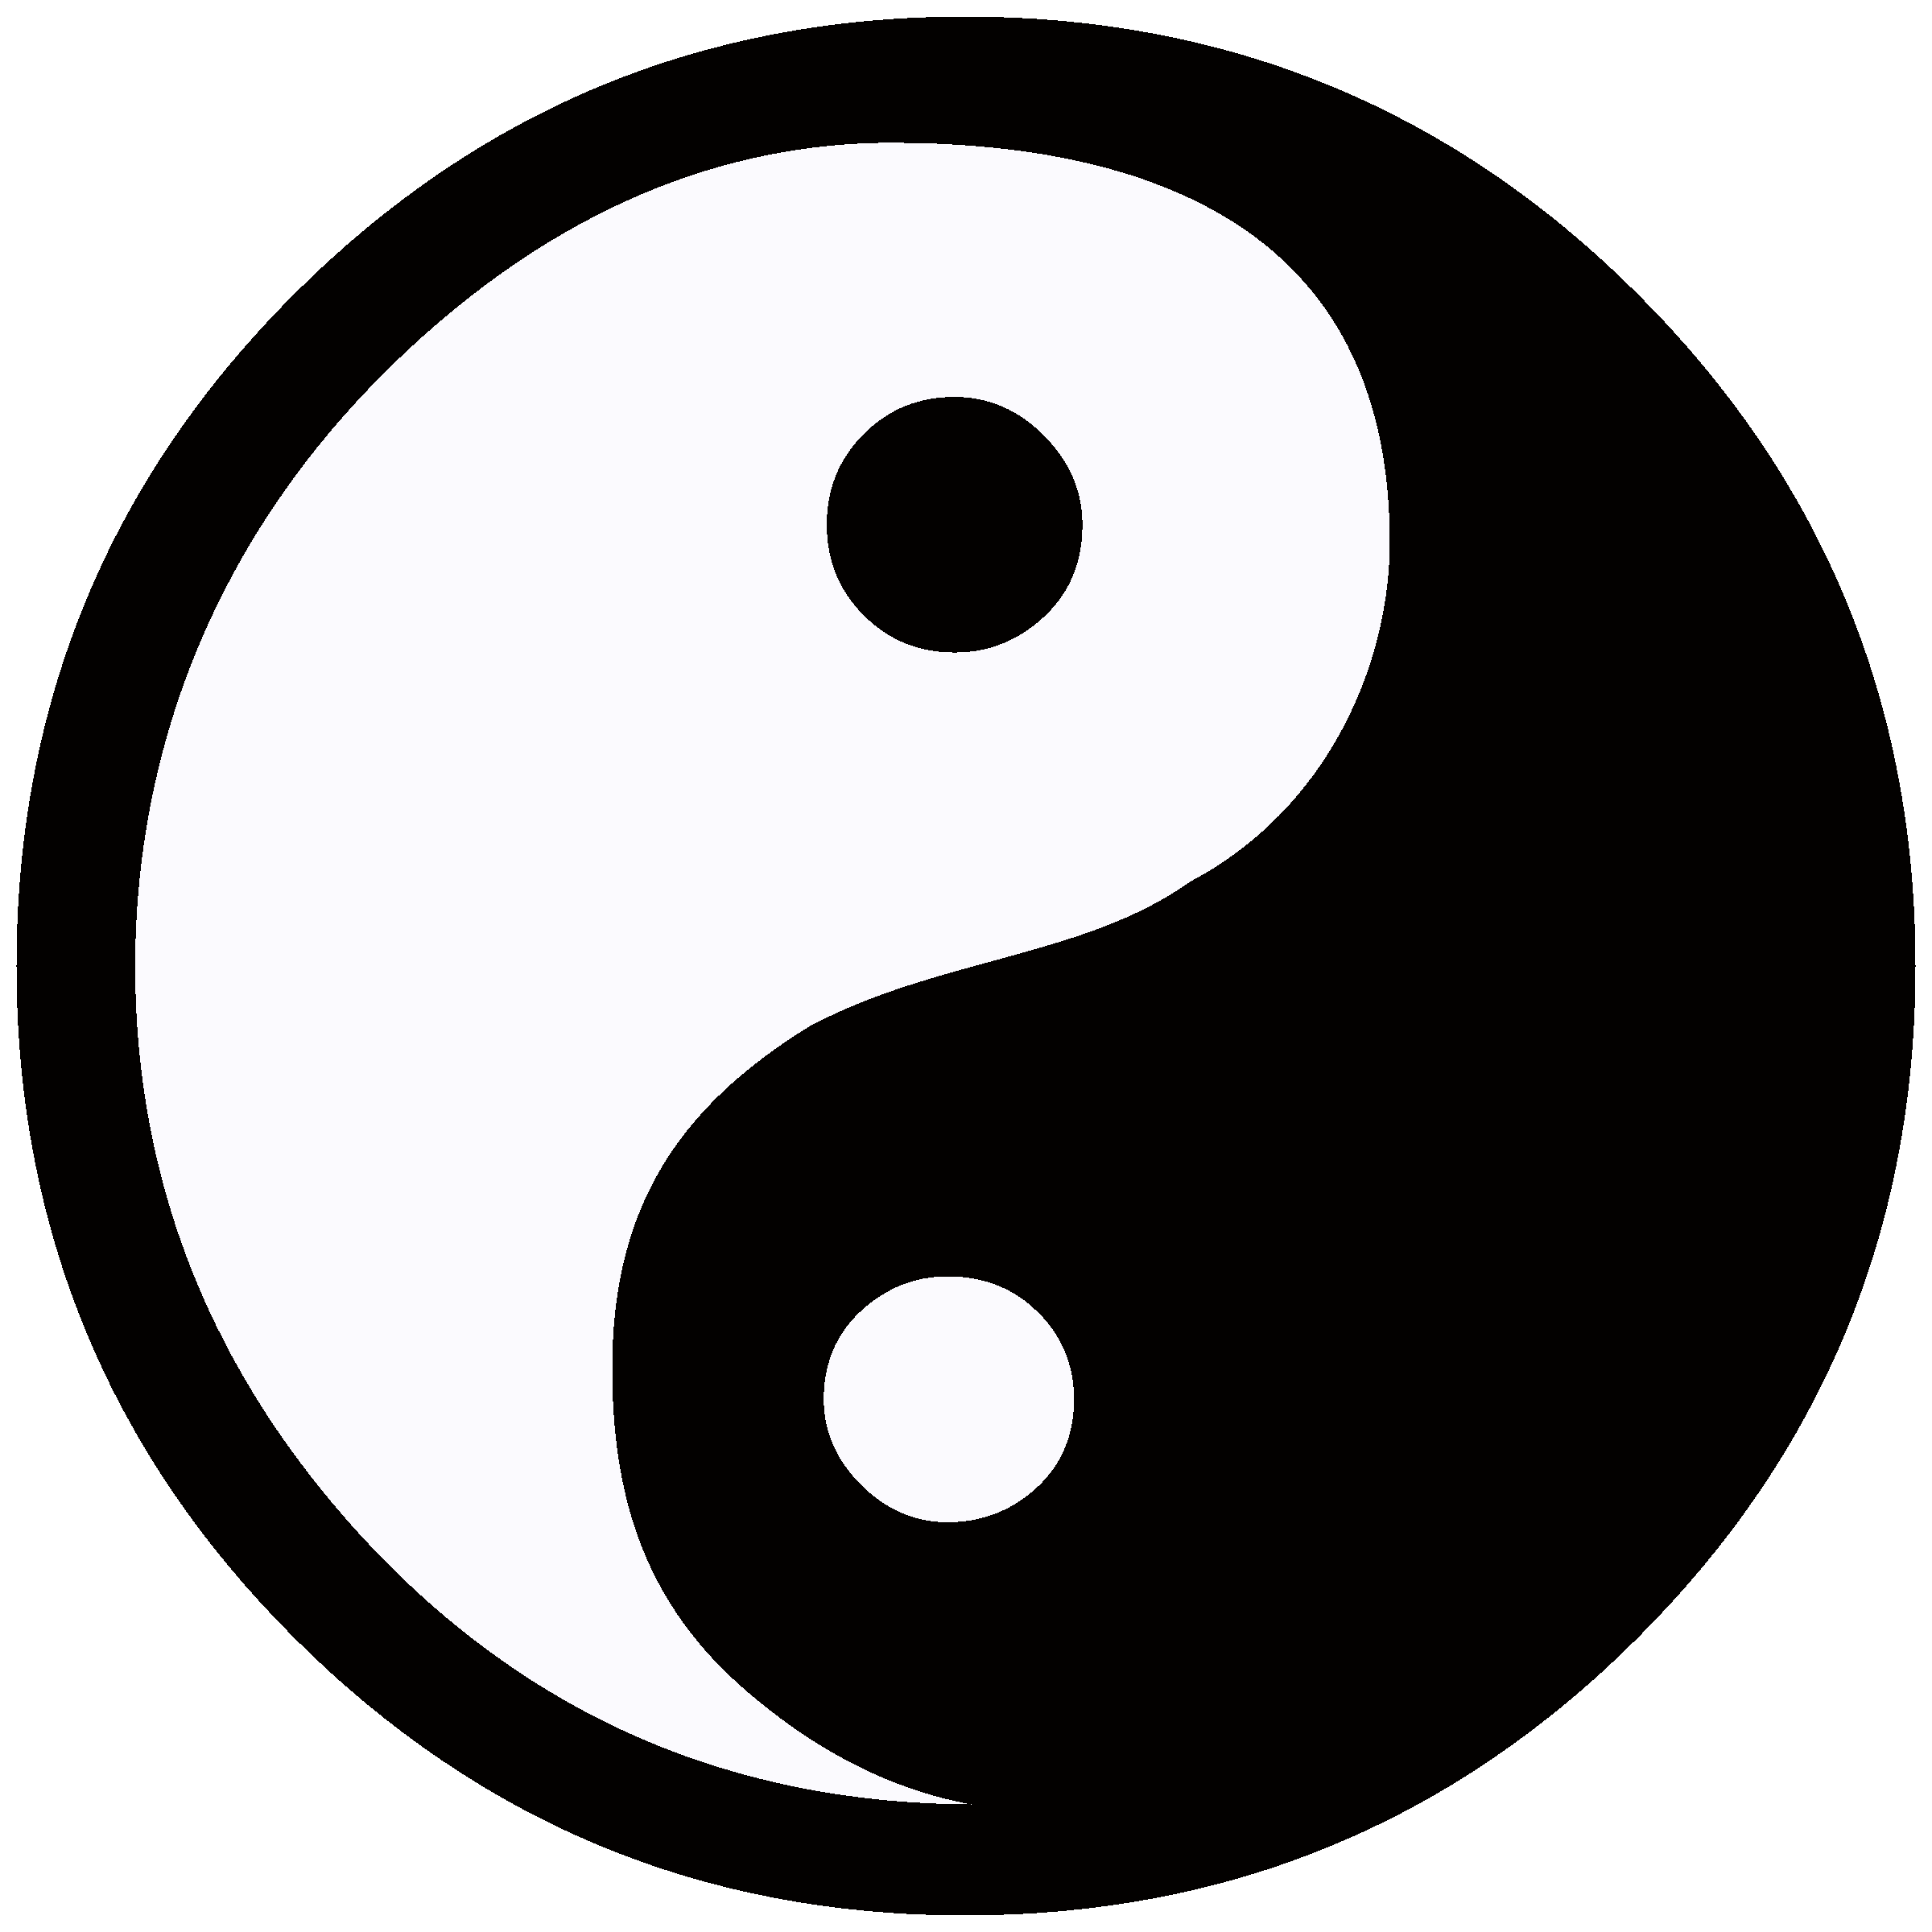 yin and yang meaning